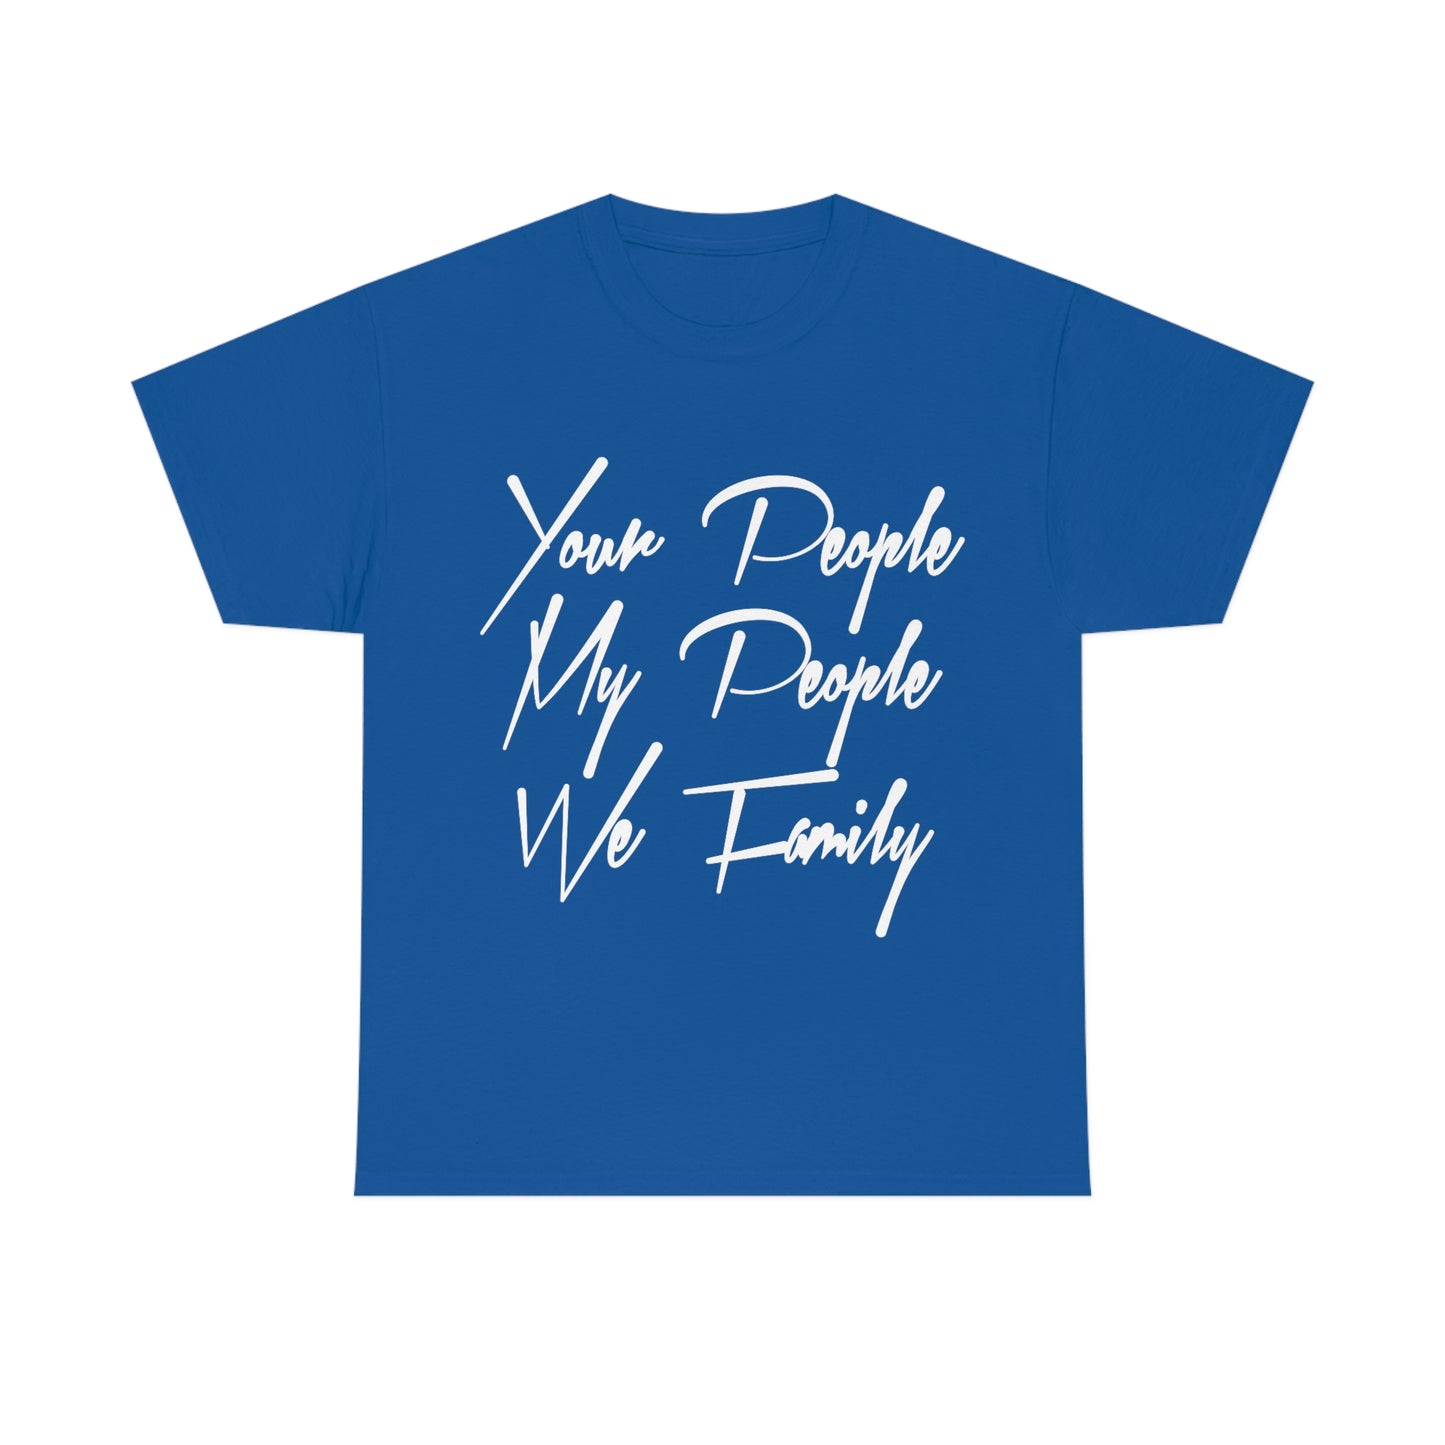 Your People My People (white letters) Tee